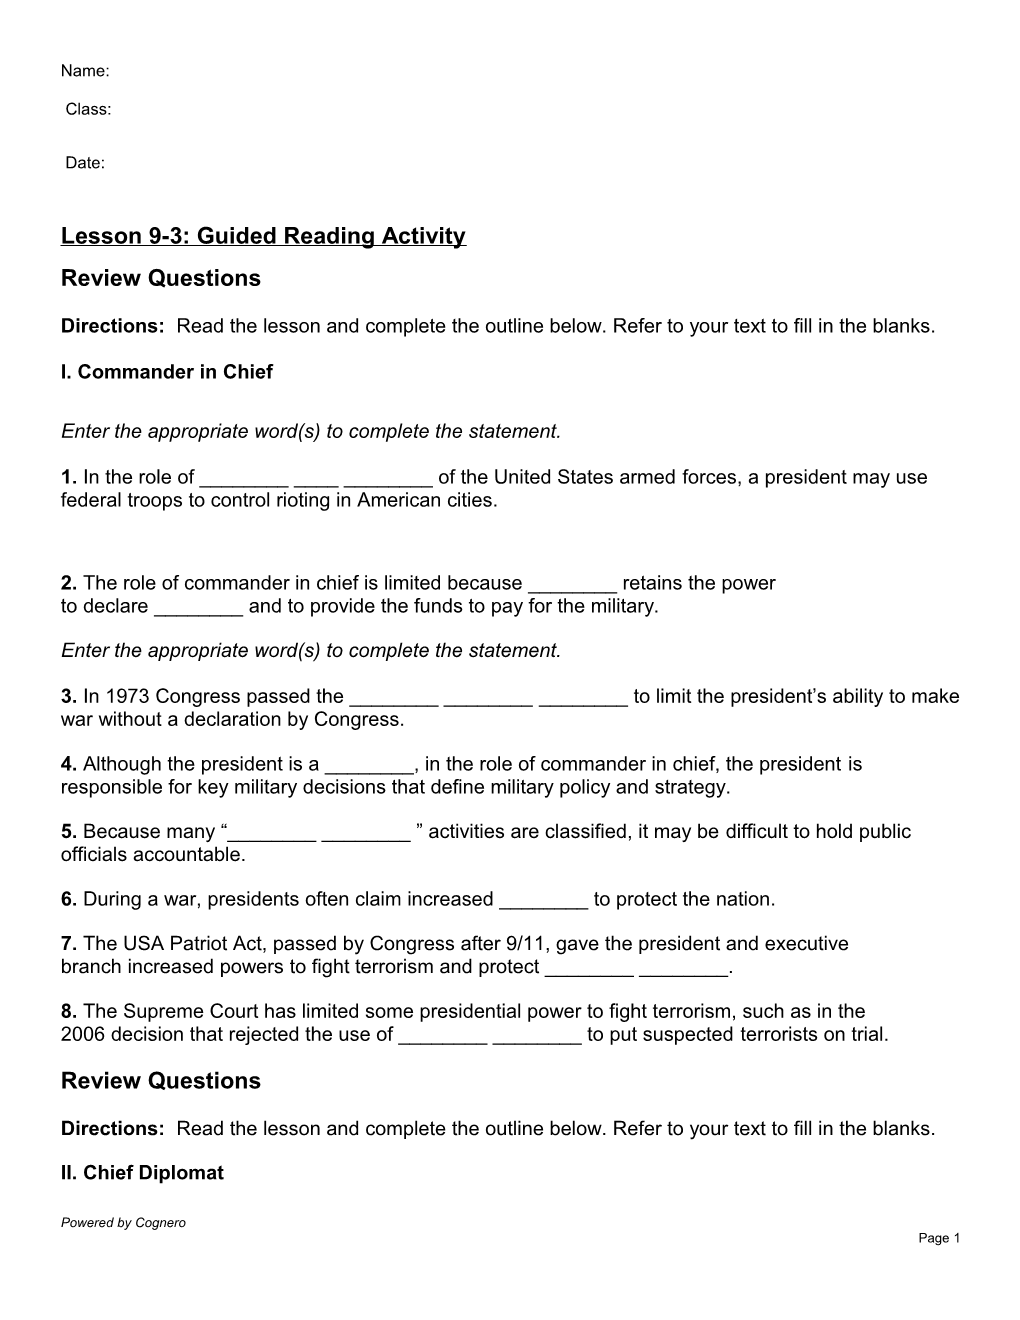 Lesson 9-3: Guided Reading Activity